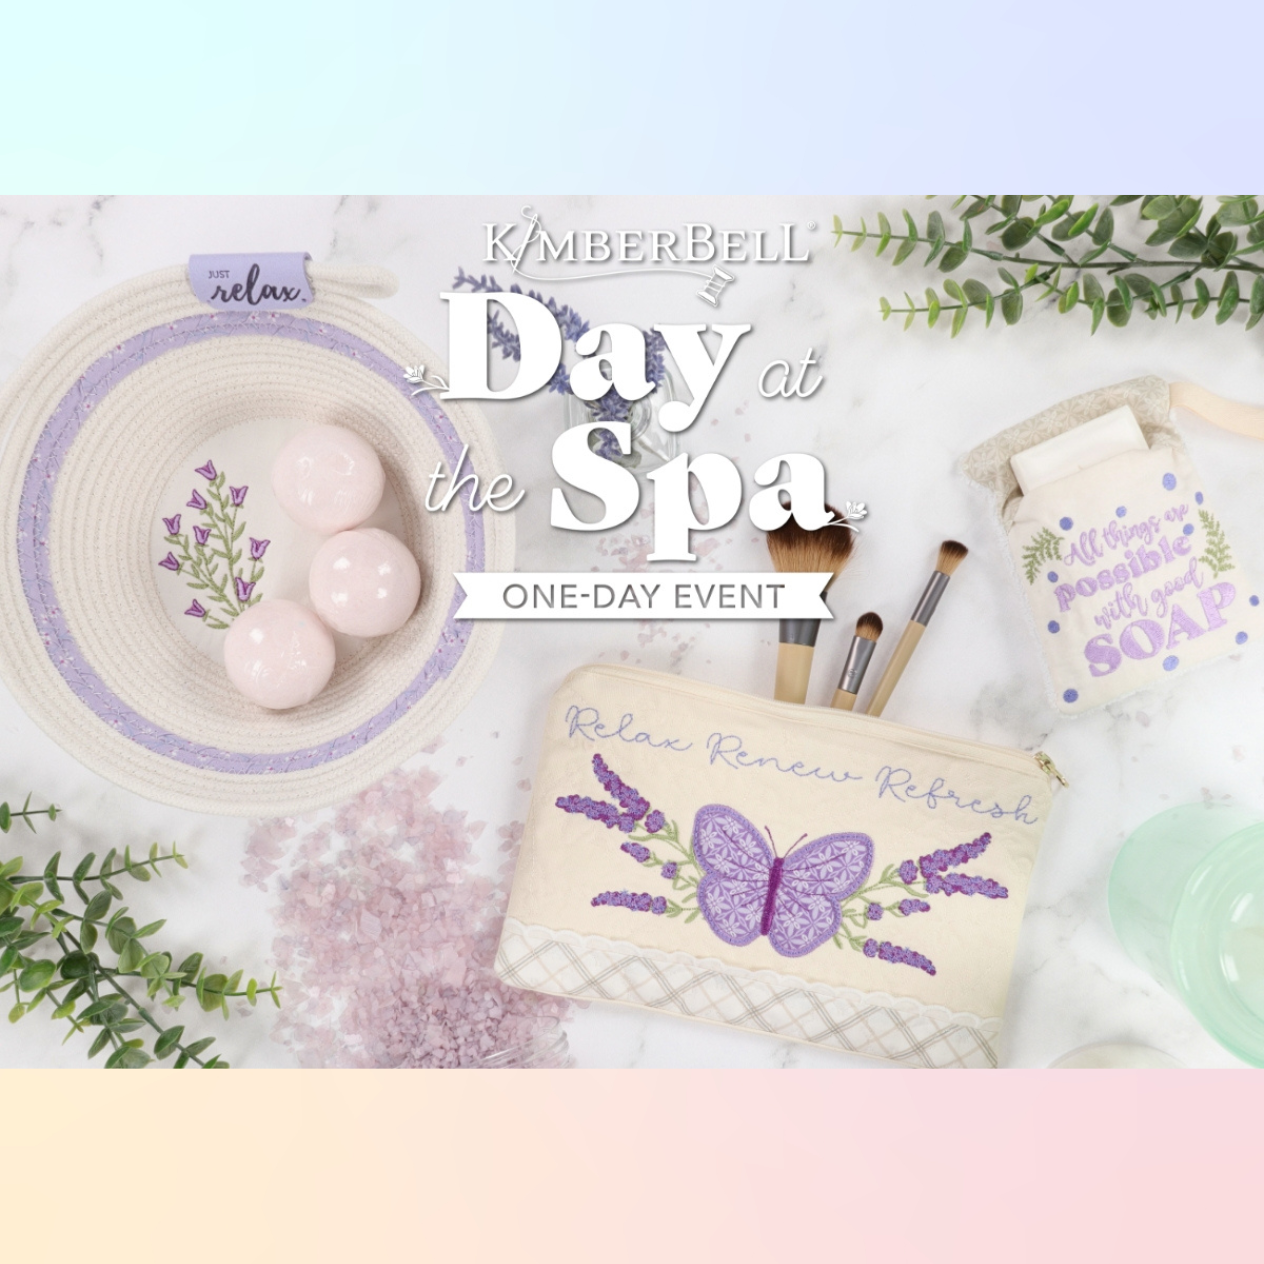 A Day At The Spa - Kimberbell 1 Day Event - Apr 27 - W2024